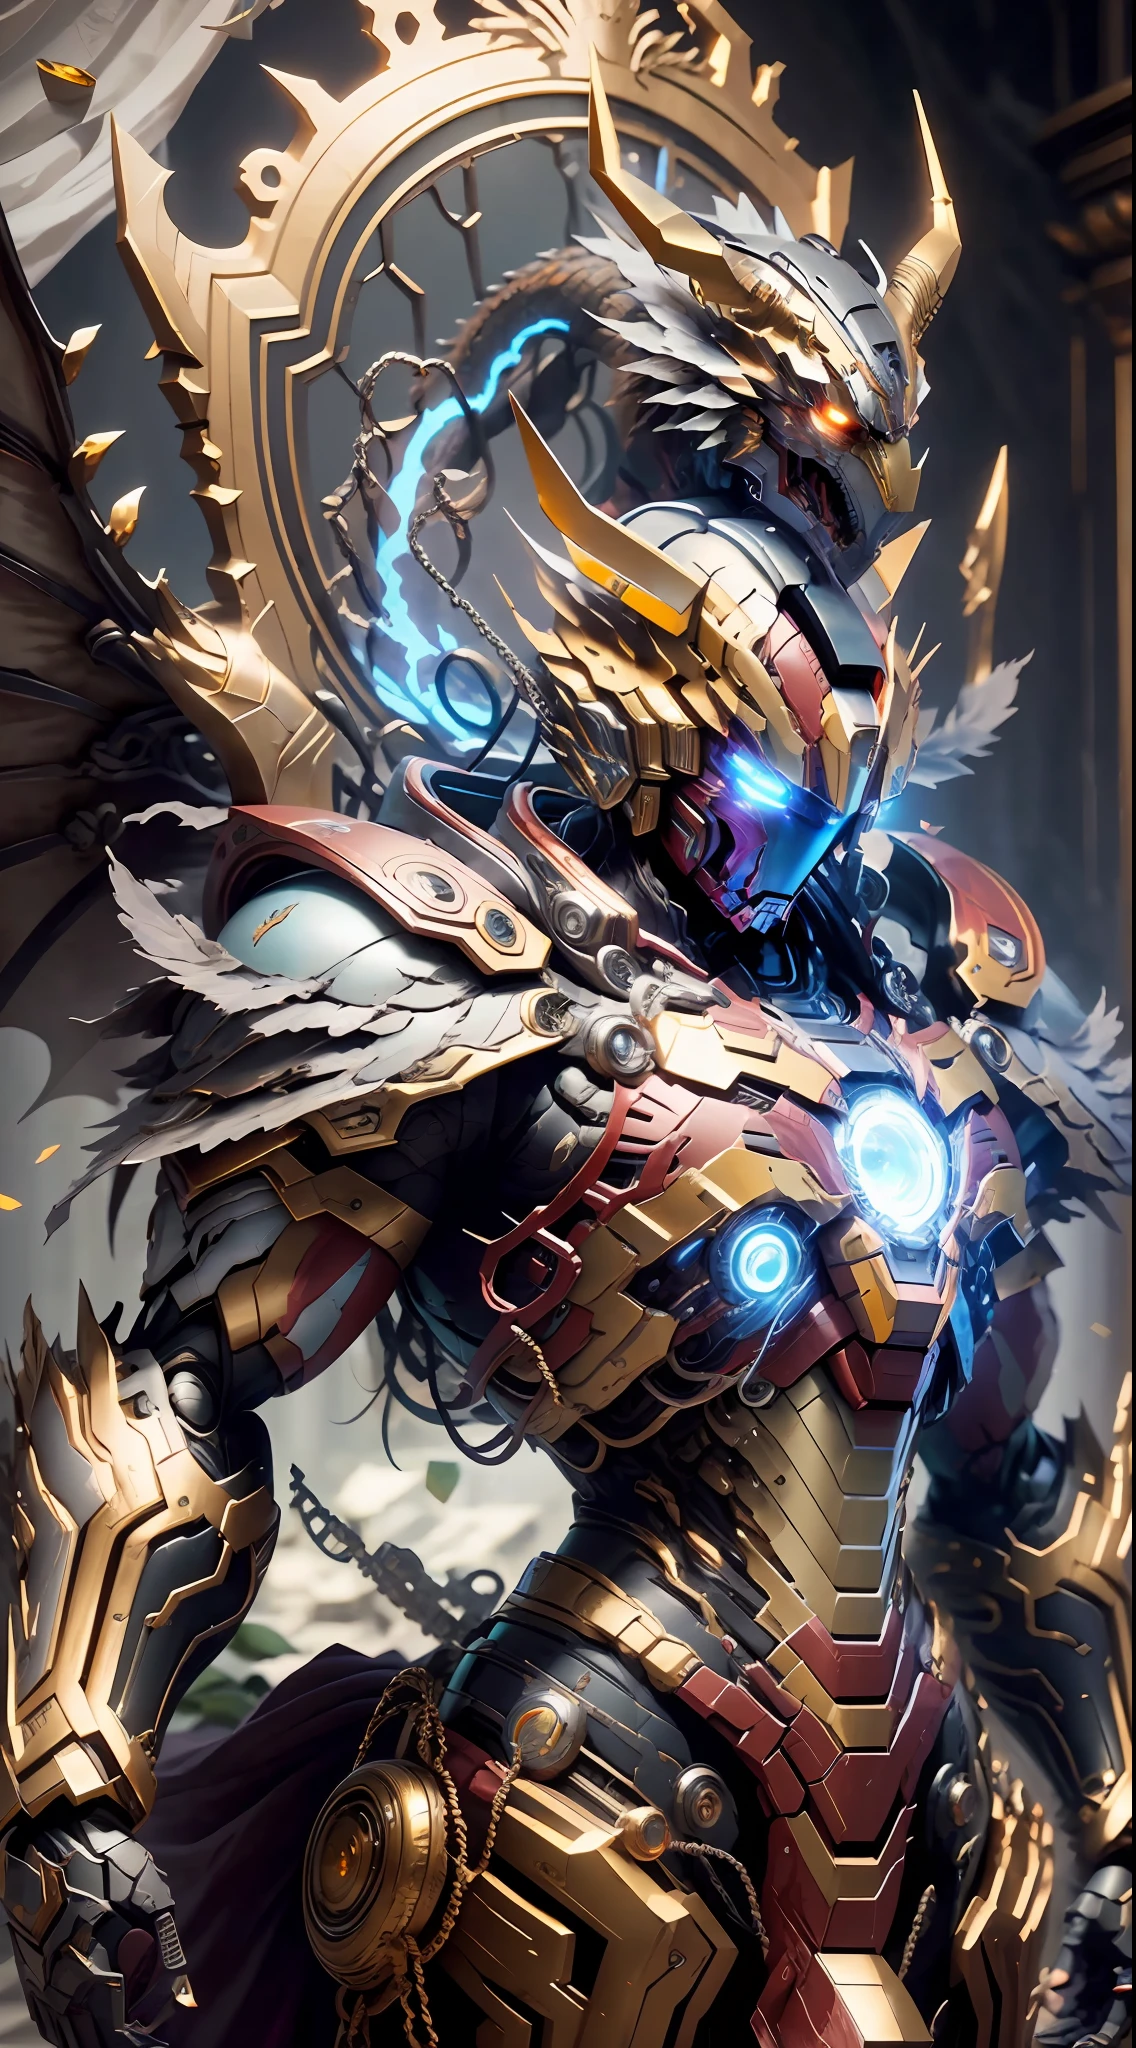 A Dragon Emperor on the Throne, (Throne), Golden Saint Seiya Limb Armor, (Dragon Symbol: 1.5), Marvel Movie Iron Man Breastplate, (Gundam 00 Gundam Exia: 1.5), (Mecha) (Mechanical) (Armor), (Open Leg: 1.3), Perfect, (Wide Angle), (Black Background: 1.6), Best Quality, Masterpiece, Super Resolution, (Reality: 1.4), bare shoulders, crazy details, (hip folds: 1.2), lower chest, side chest, unrealistic engine style, Boca effect, David La Chapelle-style lens, bioluminescent color palette: light blue, pale gold, pale pink, bright white, wide angle, ultra-fine, cinematic still life, vibrant, Sakimichan style, perfect eyes, highest image quality 8K, inspired by Harry Winston, Canon EOS R 6 shooting masterpiece "Chaos 50." ,--, under eye mole, ray tracing, surrealism, textured skin --s2